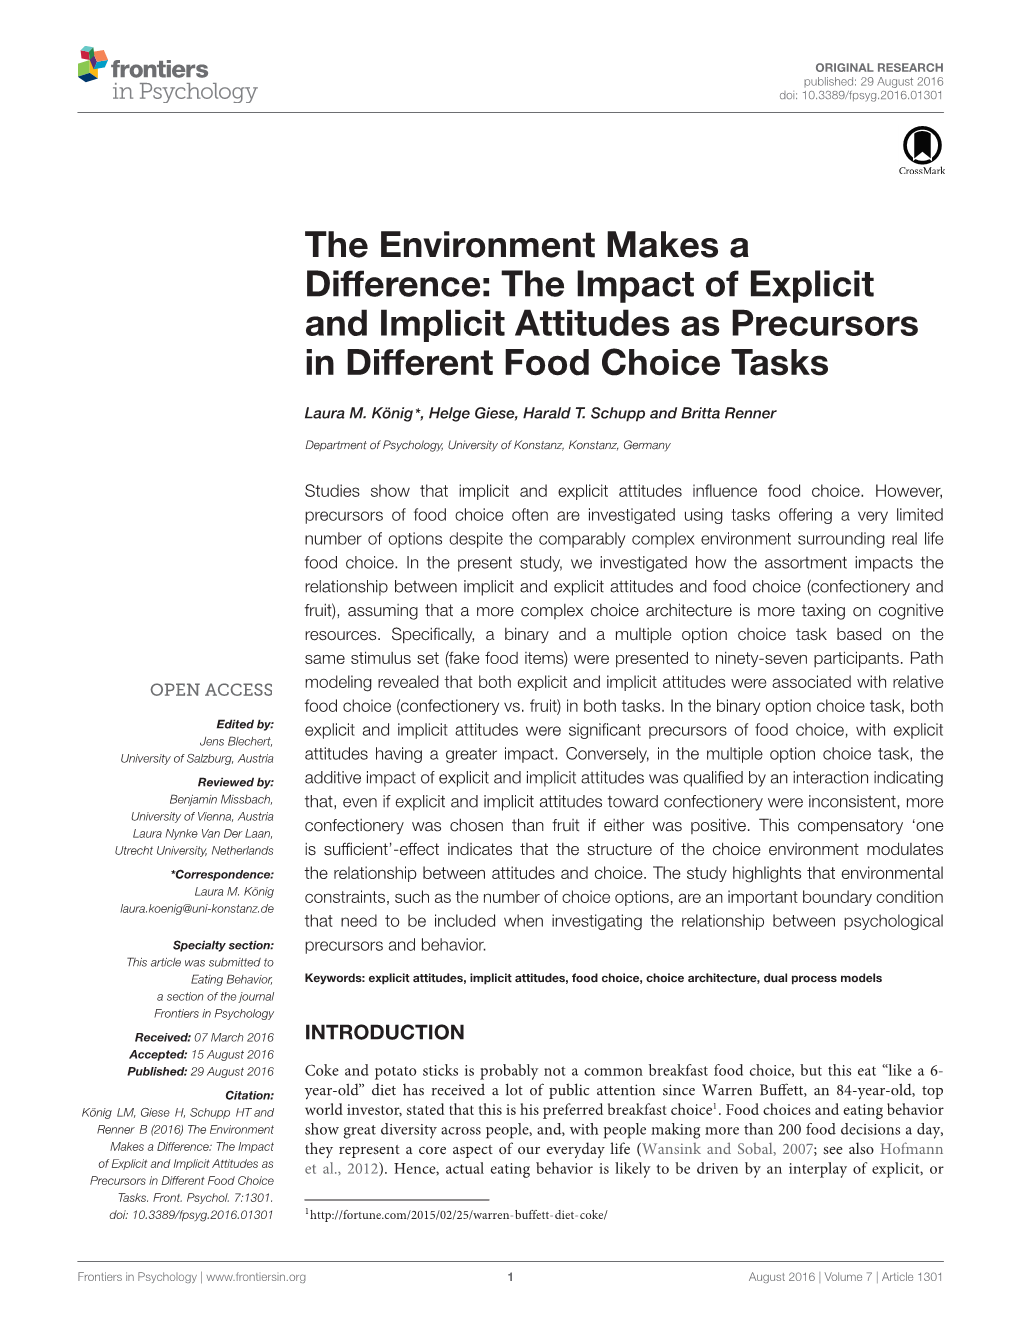 The Impact of Explicit and Implicit Attitudes As Precursors in Different Food Choice Tasks